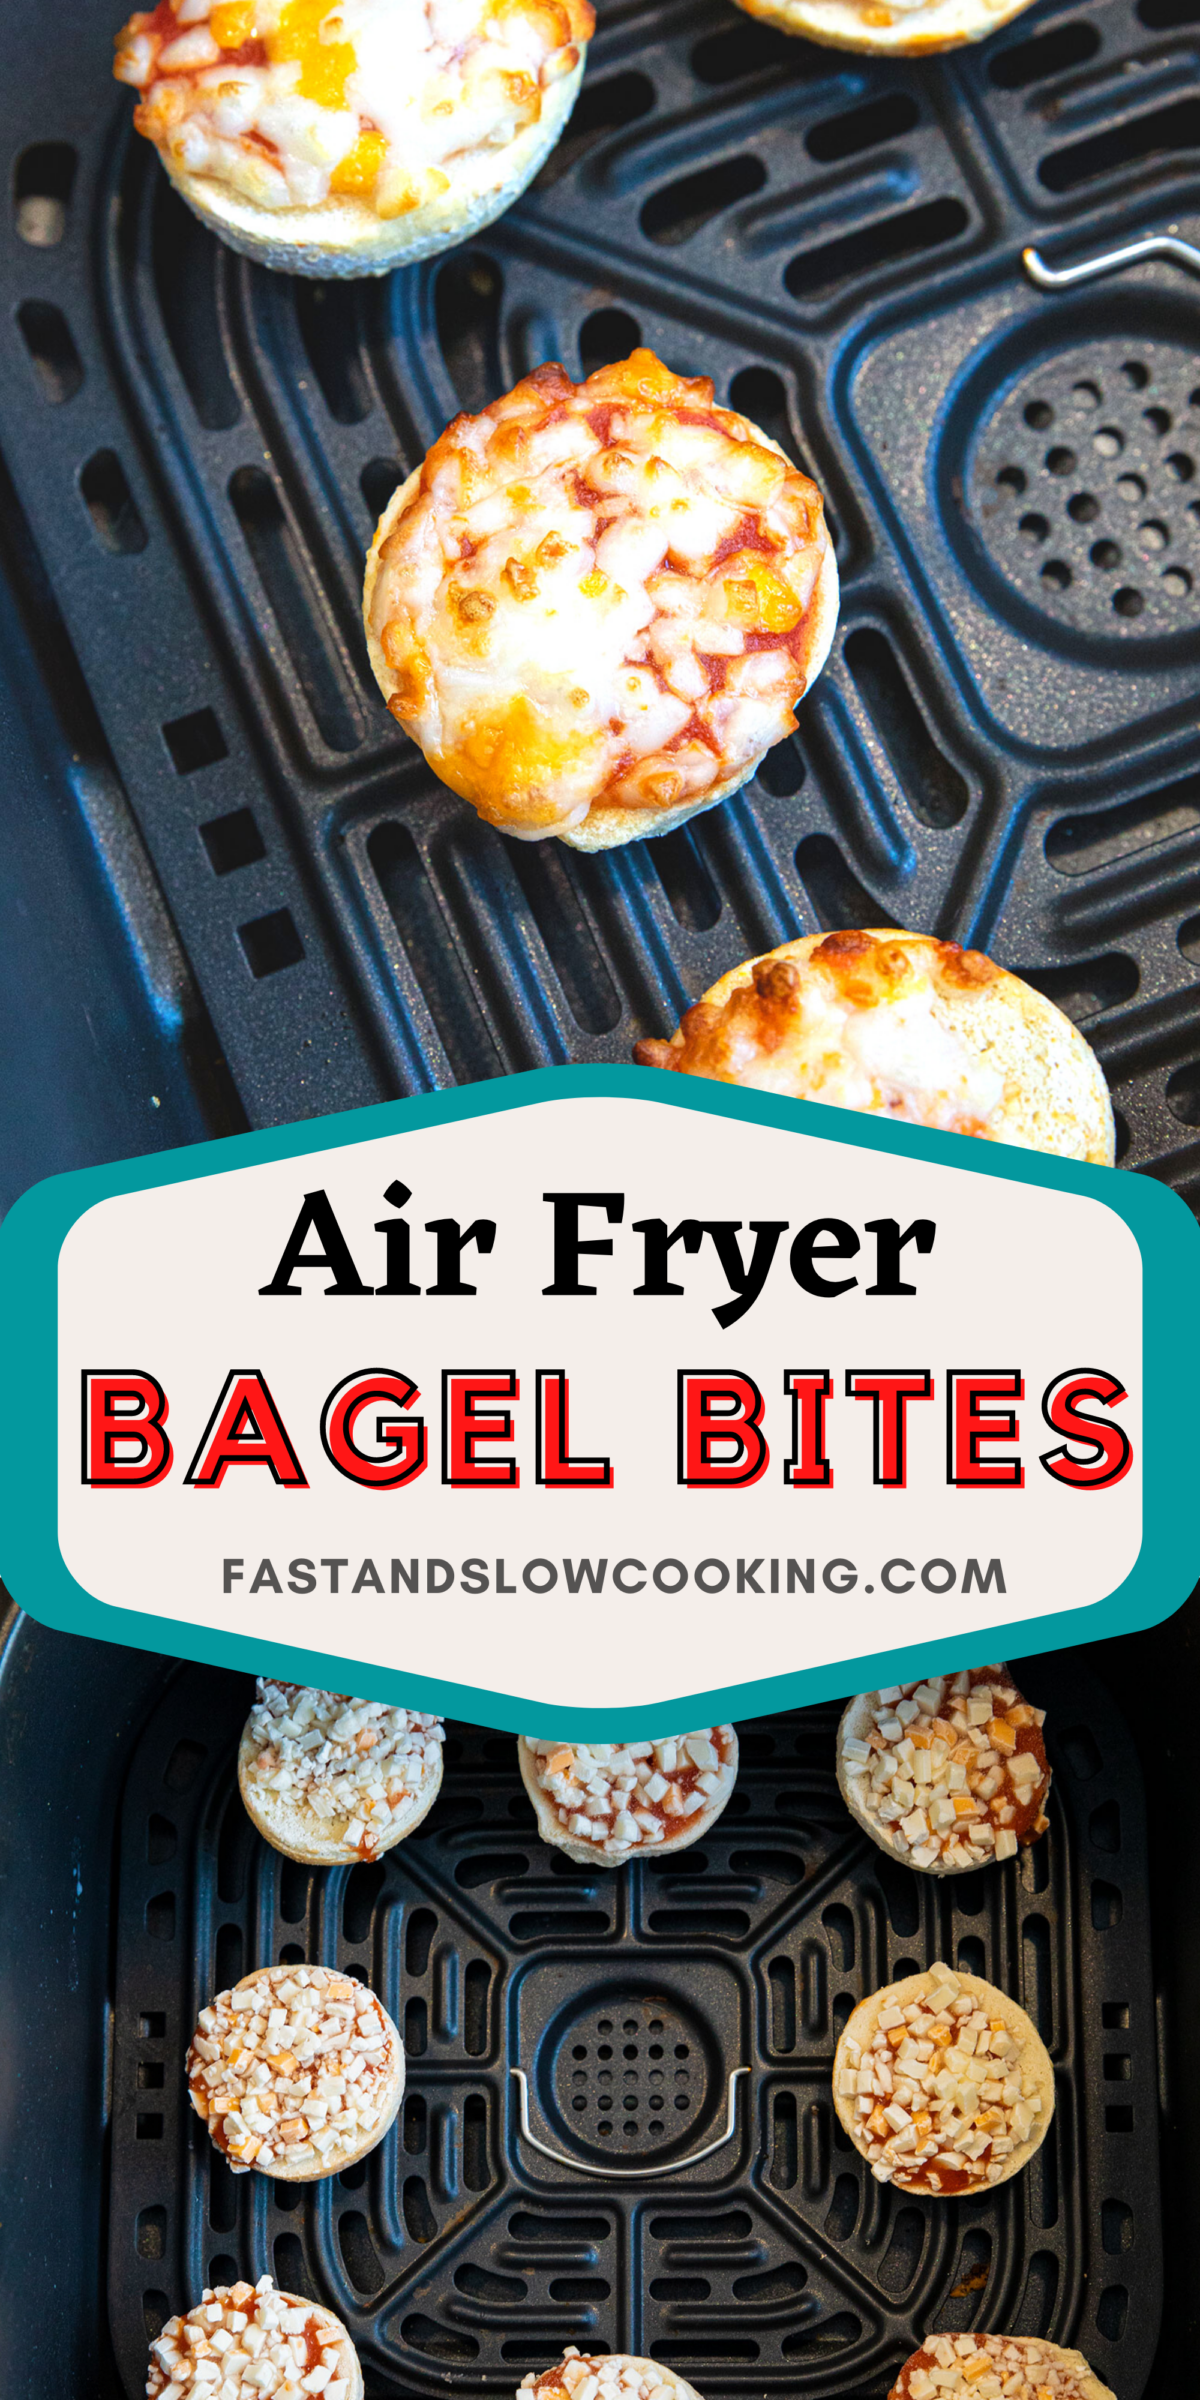 These bagel bites in the air fryer are a fast, fun, and delicious after-school snack that the kids will love!